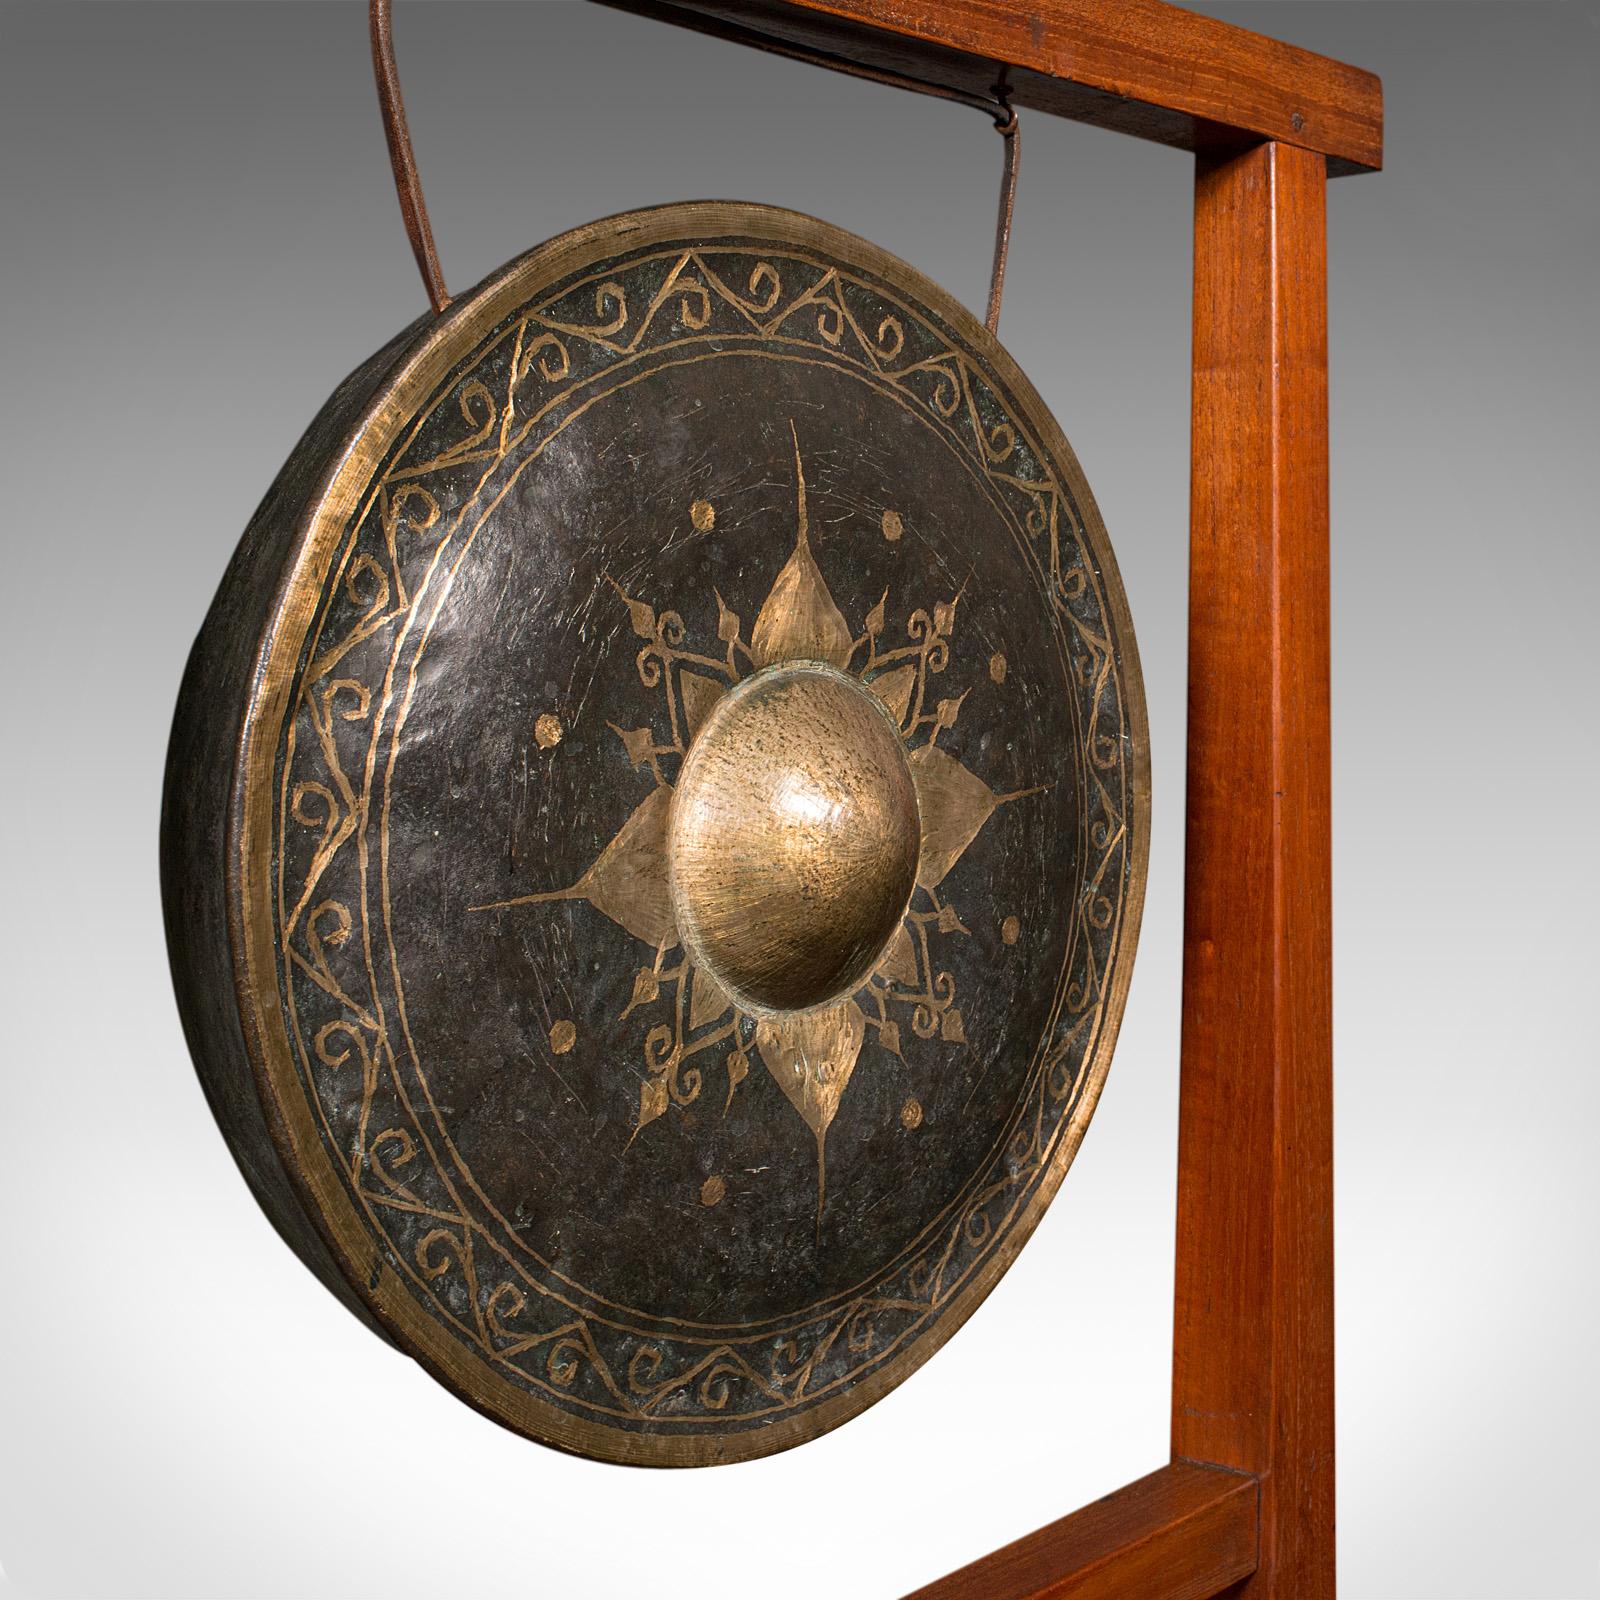 British Antique Dinner Gong, English, Fruitwood, Large Chime, Arts & Crafts, Edwardian For Sale